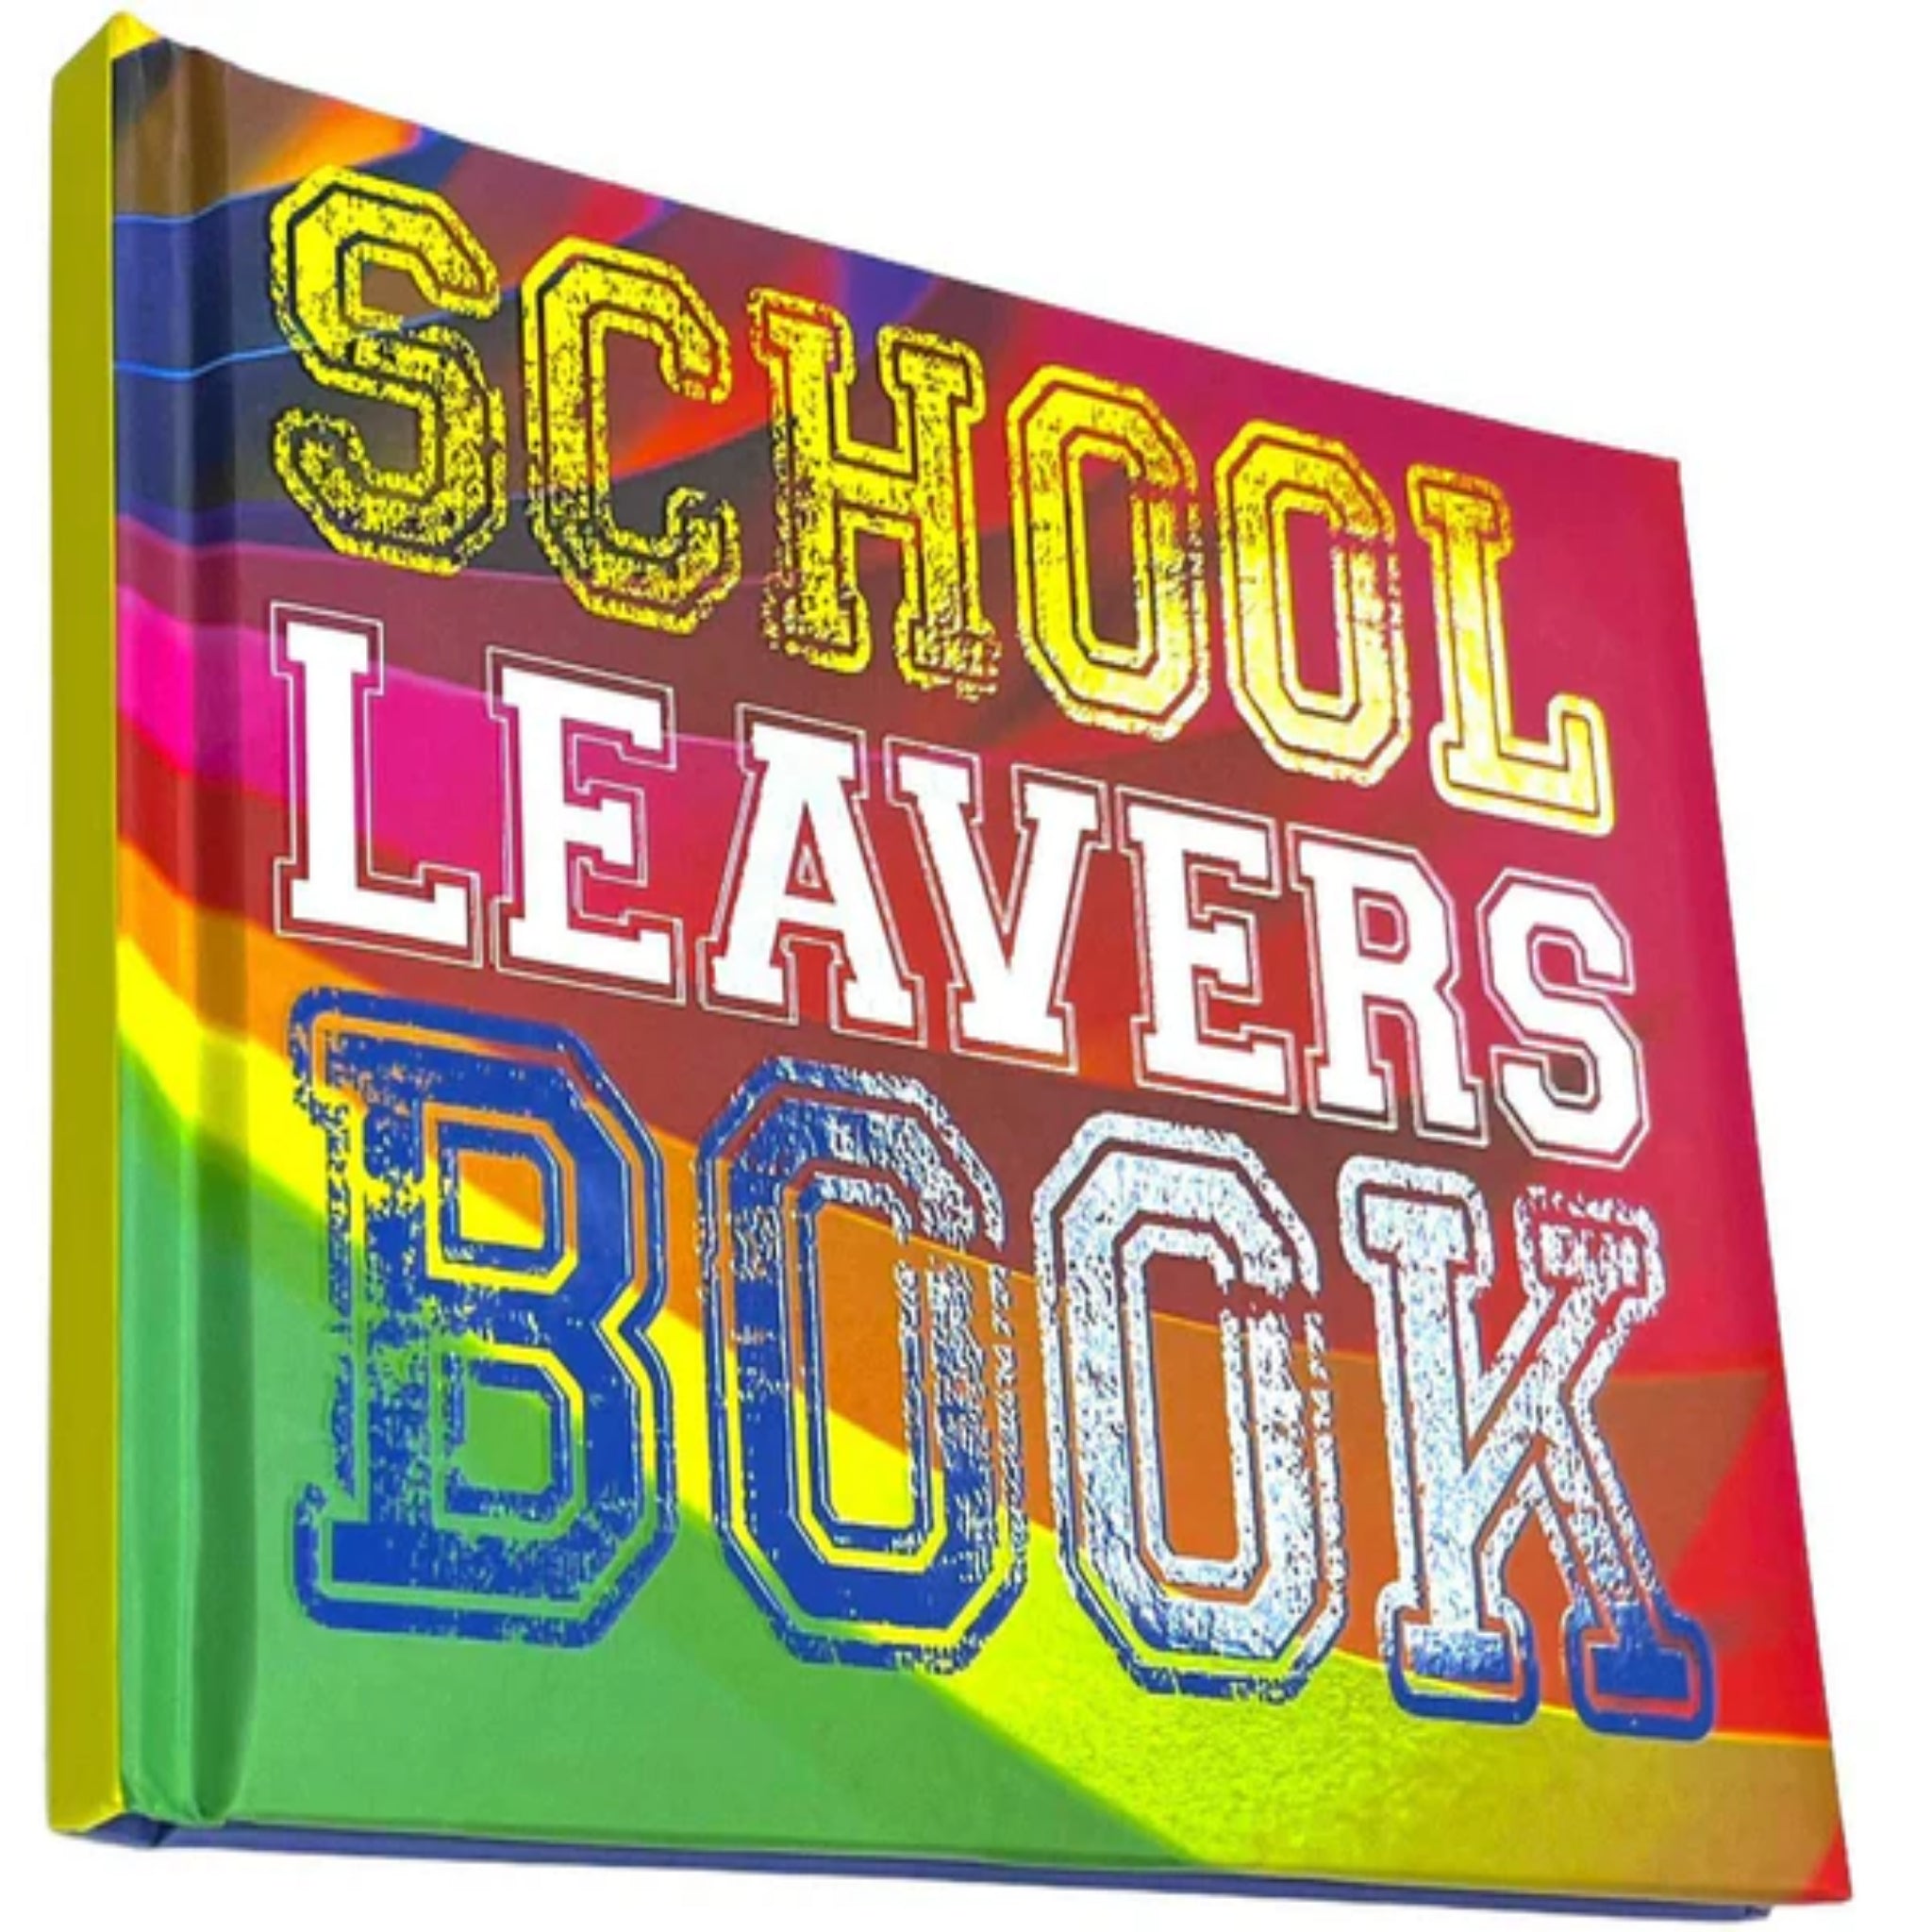 Beclen Harp 12 Pack Leavers Book School College Autograph Book Hard Backed Padded Cover Bulk